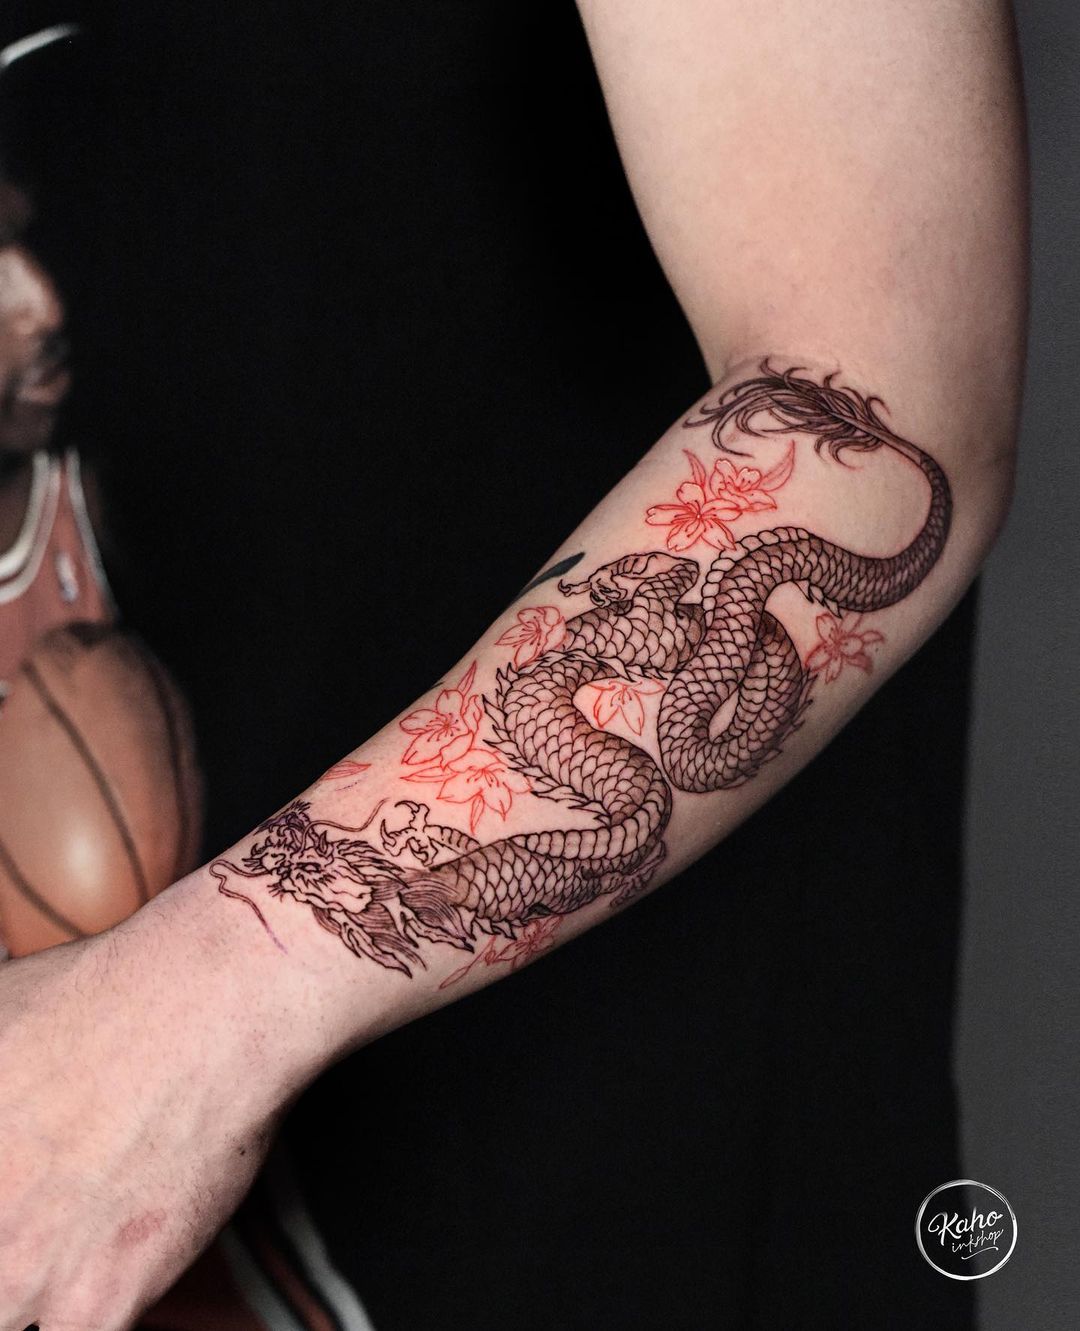 Dragon Tattoos For Men To Unleash Your Inner Strength : Explore Breathtaking Ideas